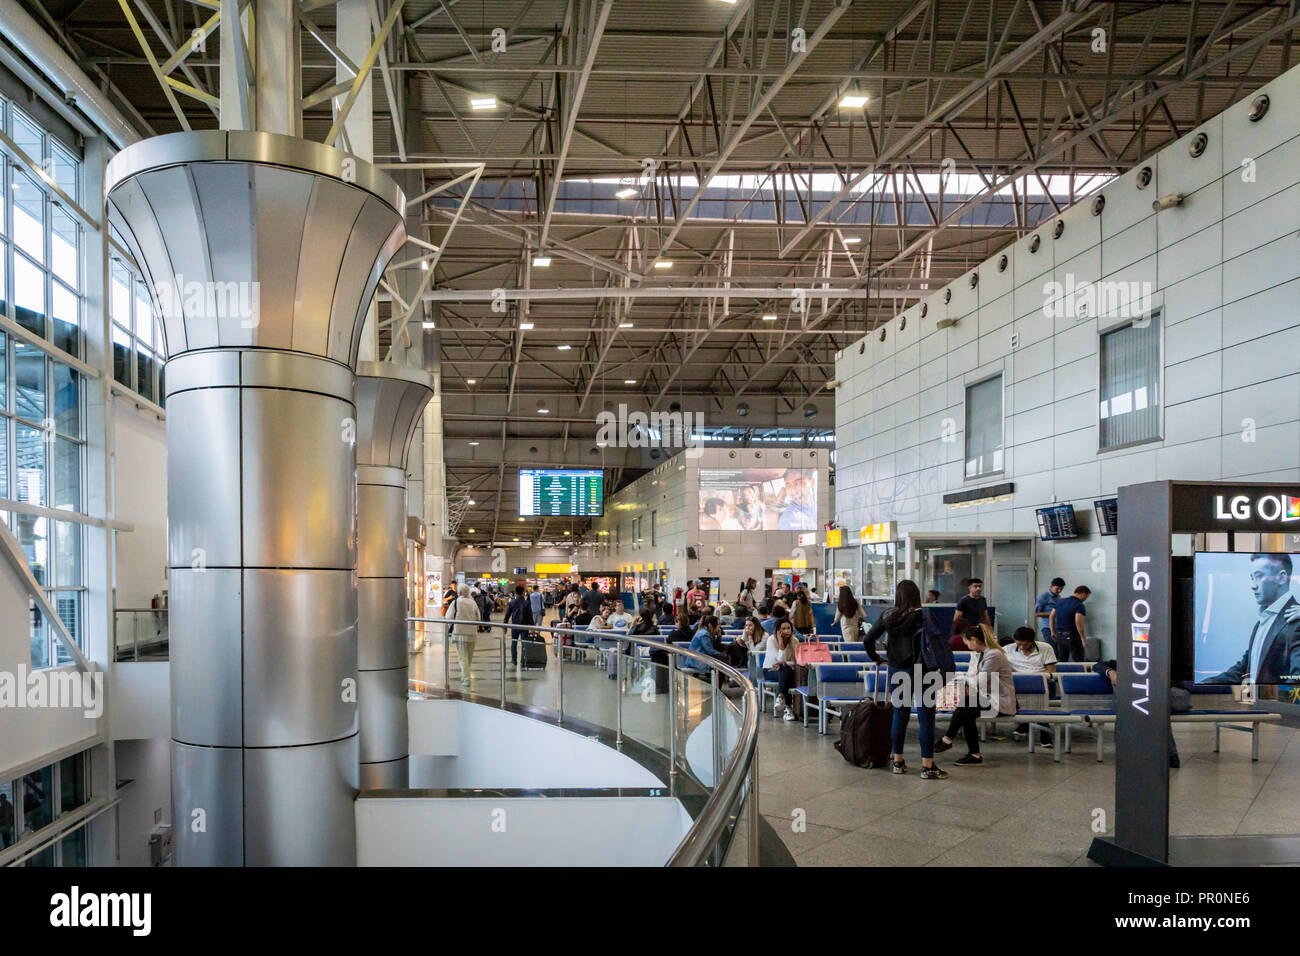 Almaty, Kazakhstan - September, 2018: Almaty airport architecture. The Almaty airport is the largest international airport in Kazakhstan. Stock Photo